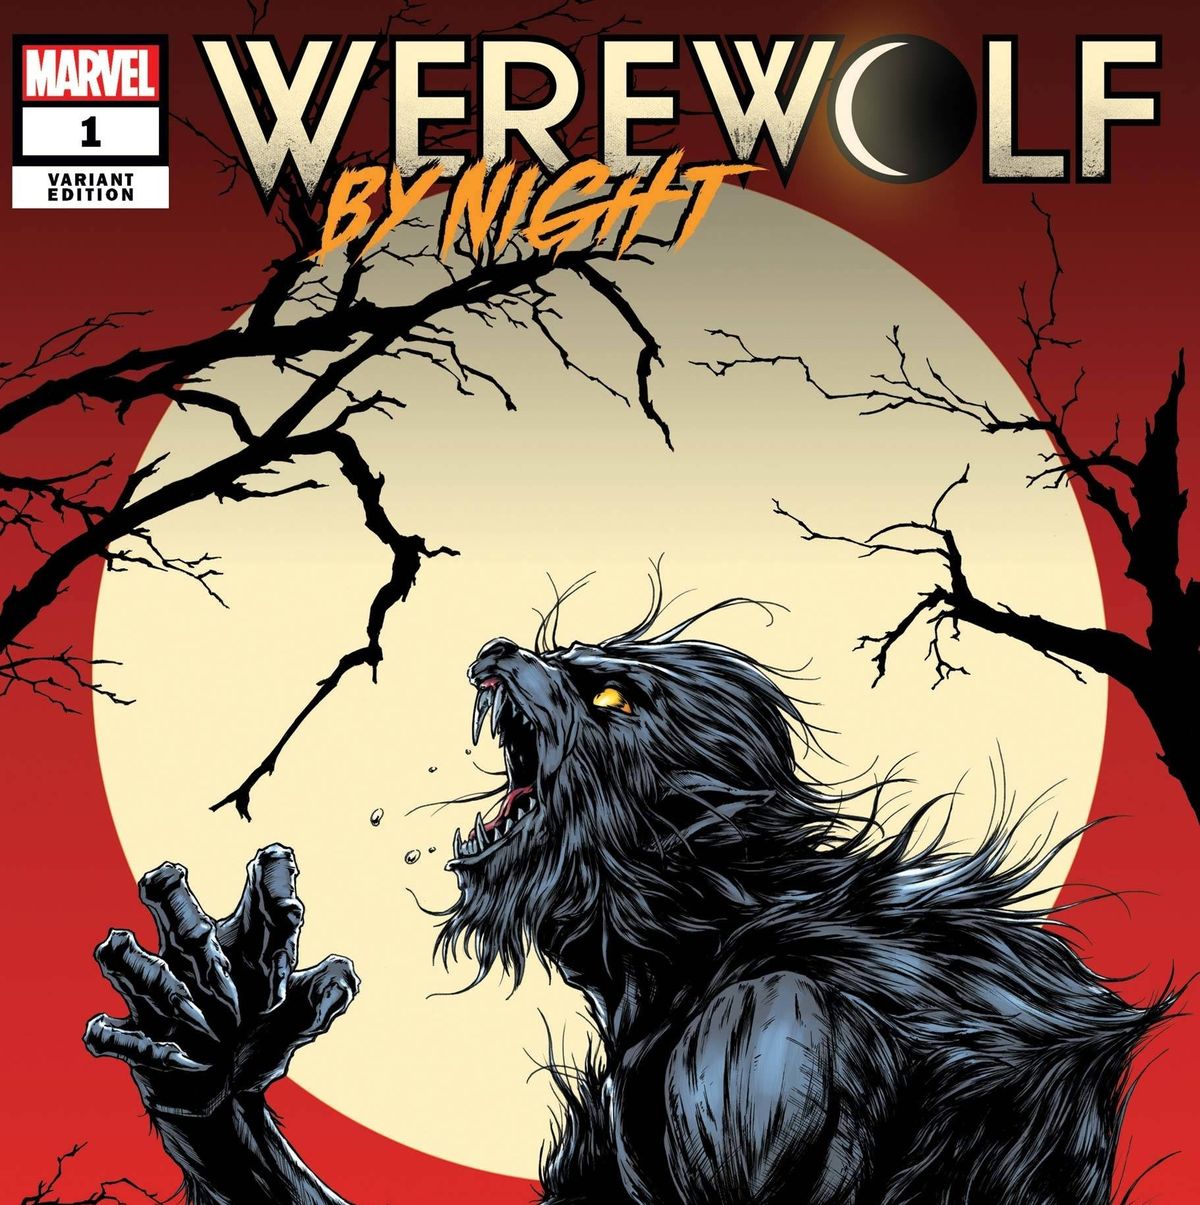 Every Character In Werewolf By Night, Ranked Worst To Best